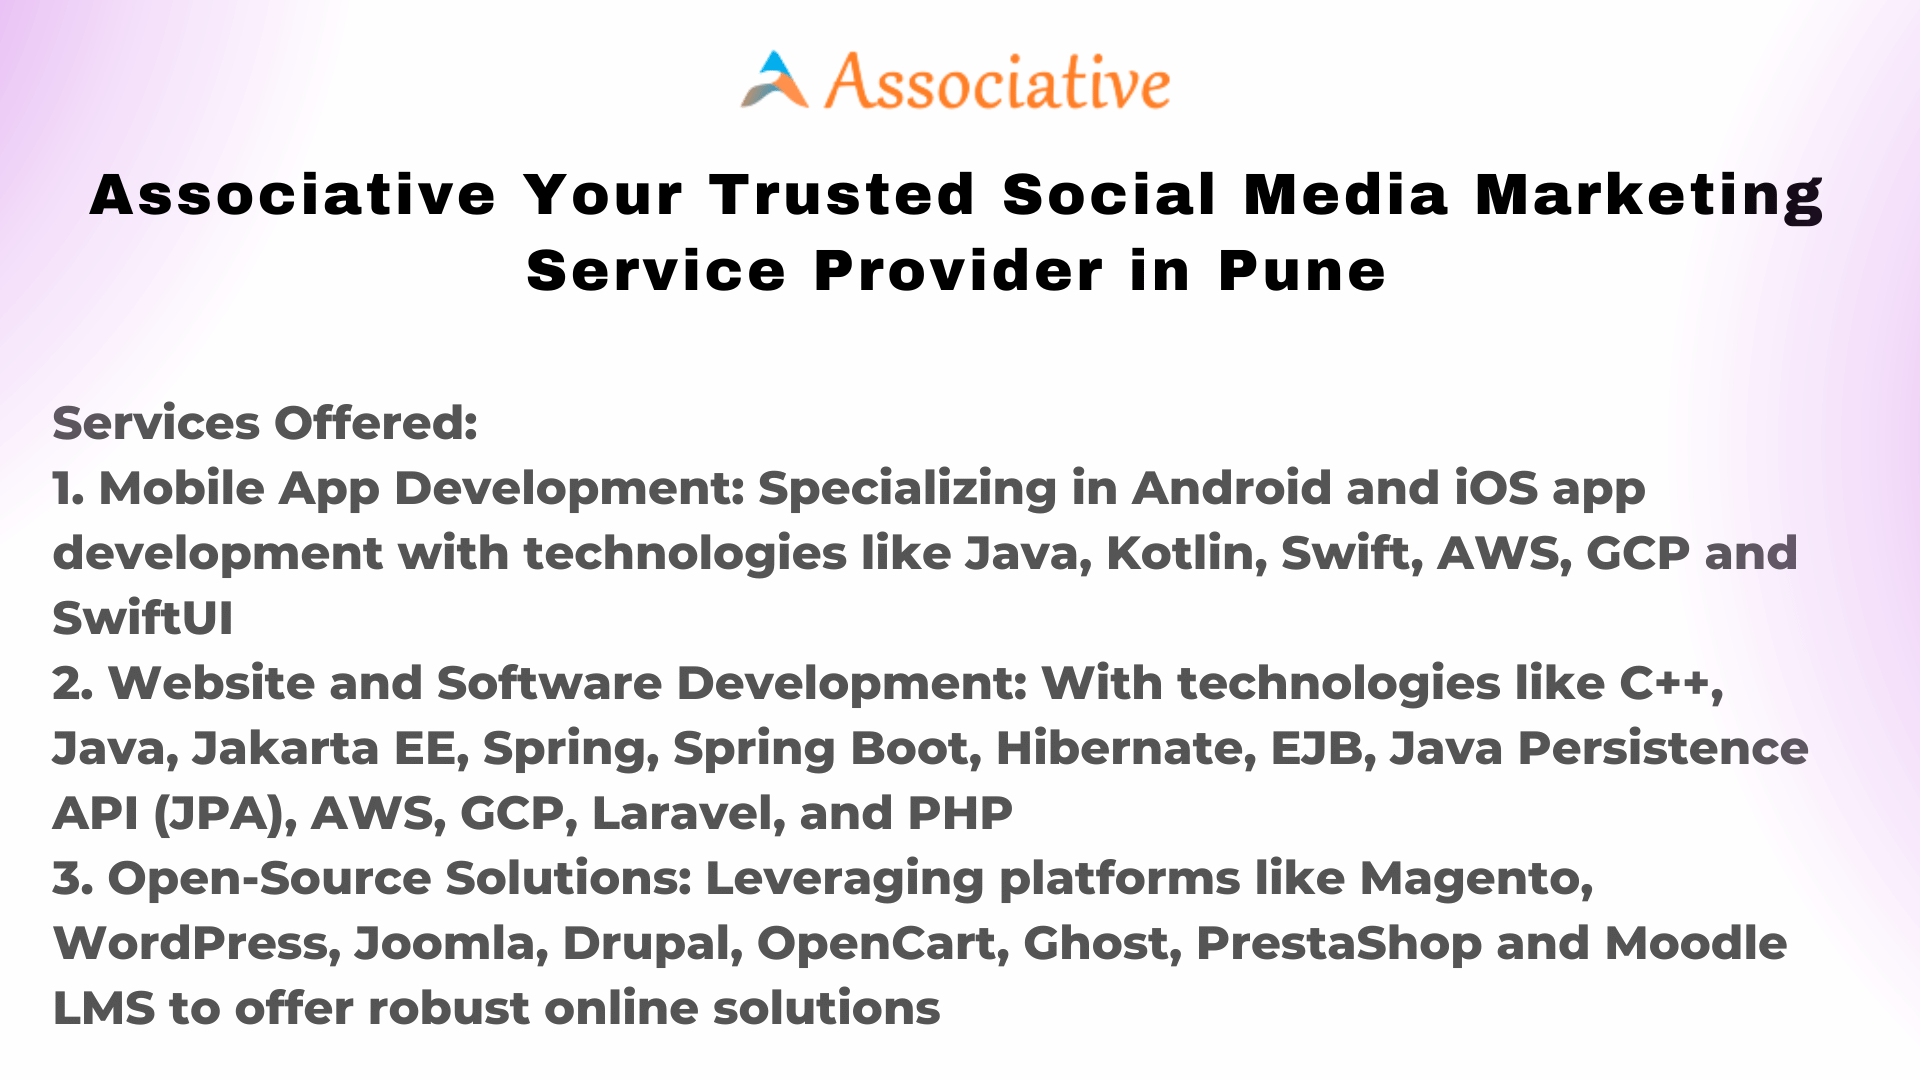 Associative Your Trusted Social Media Marketing Service Provider in Pune